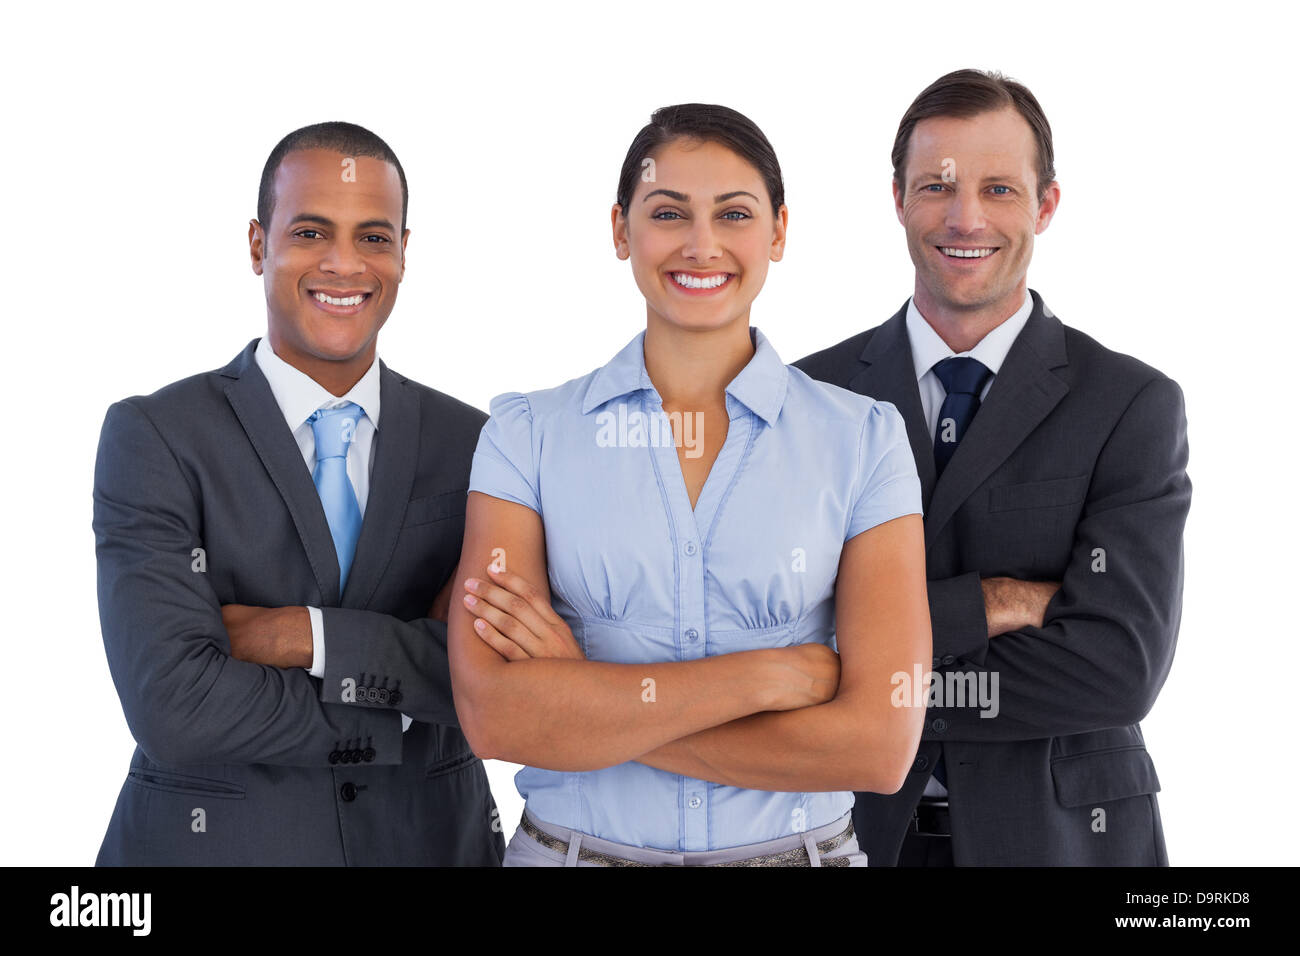 Small group of smiling business people standing together Stock Photo